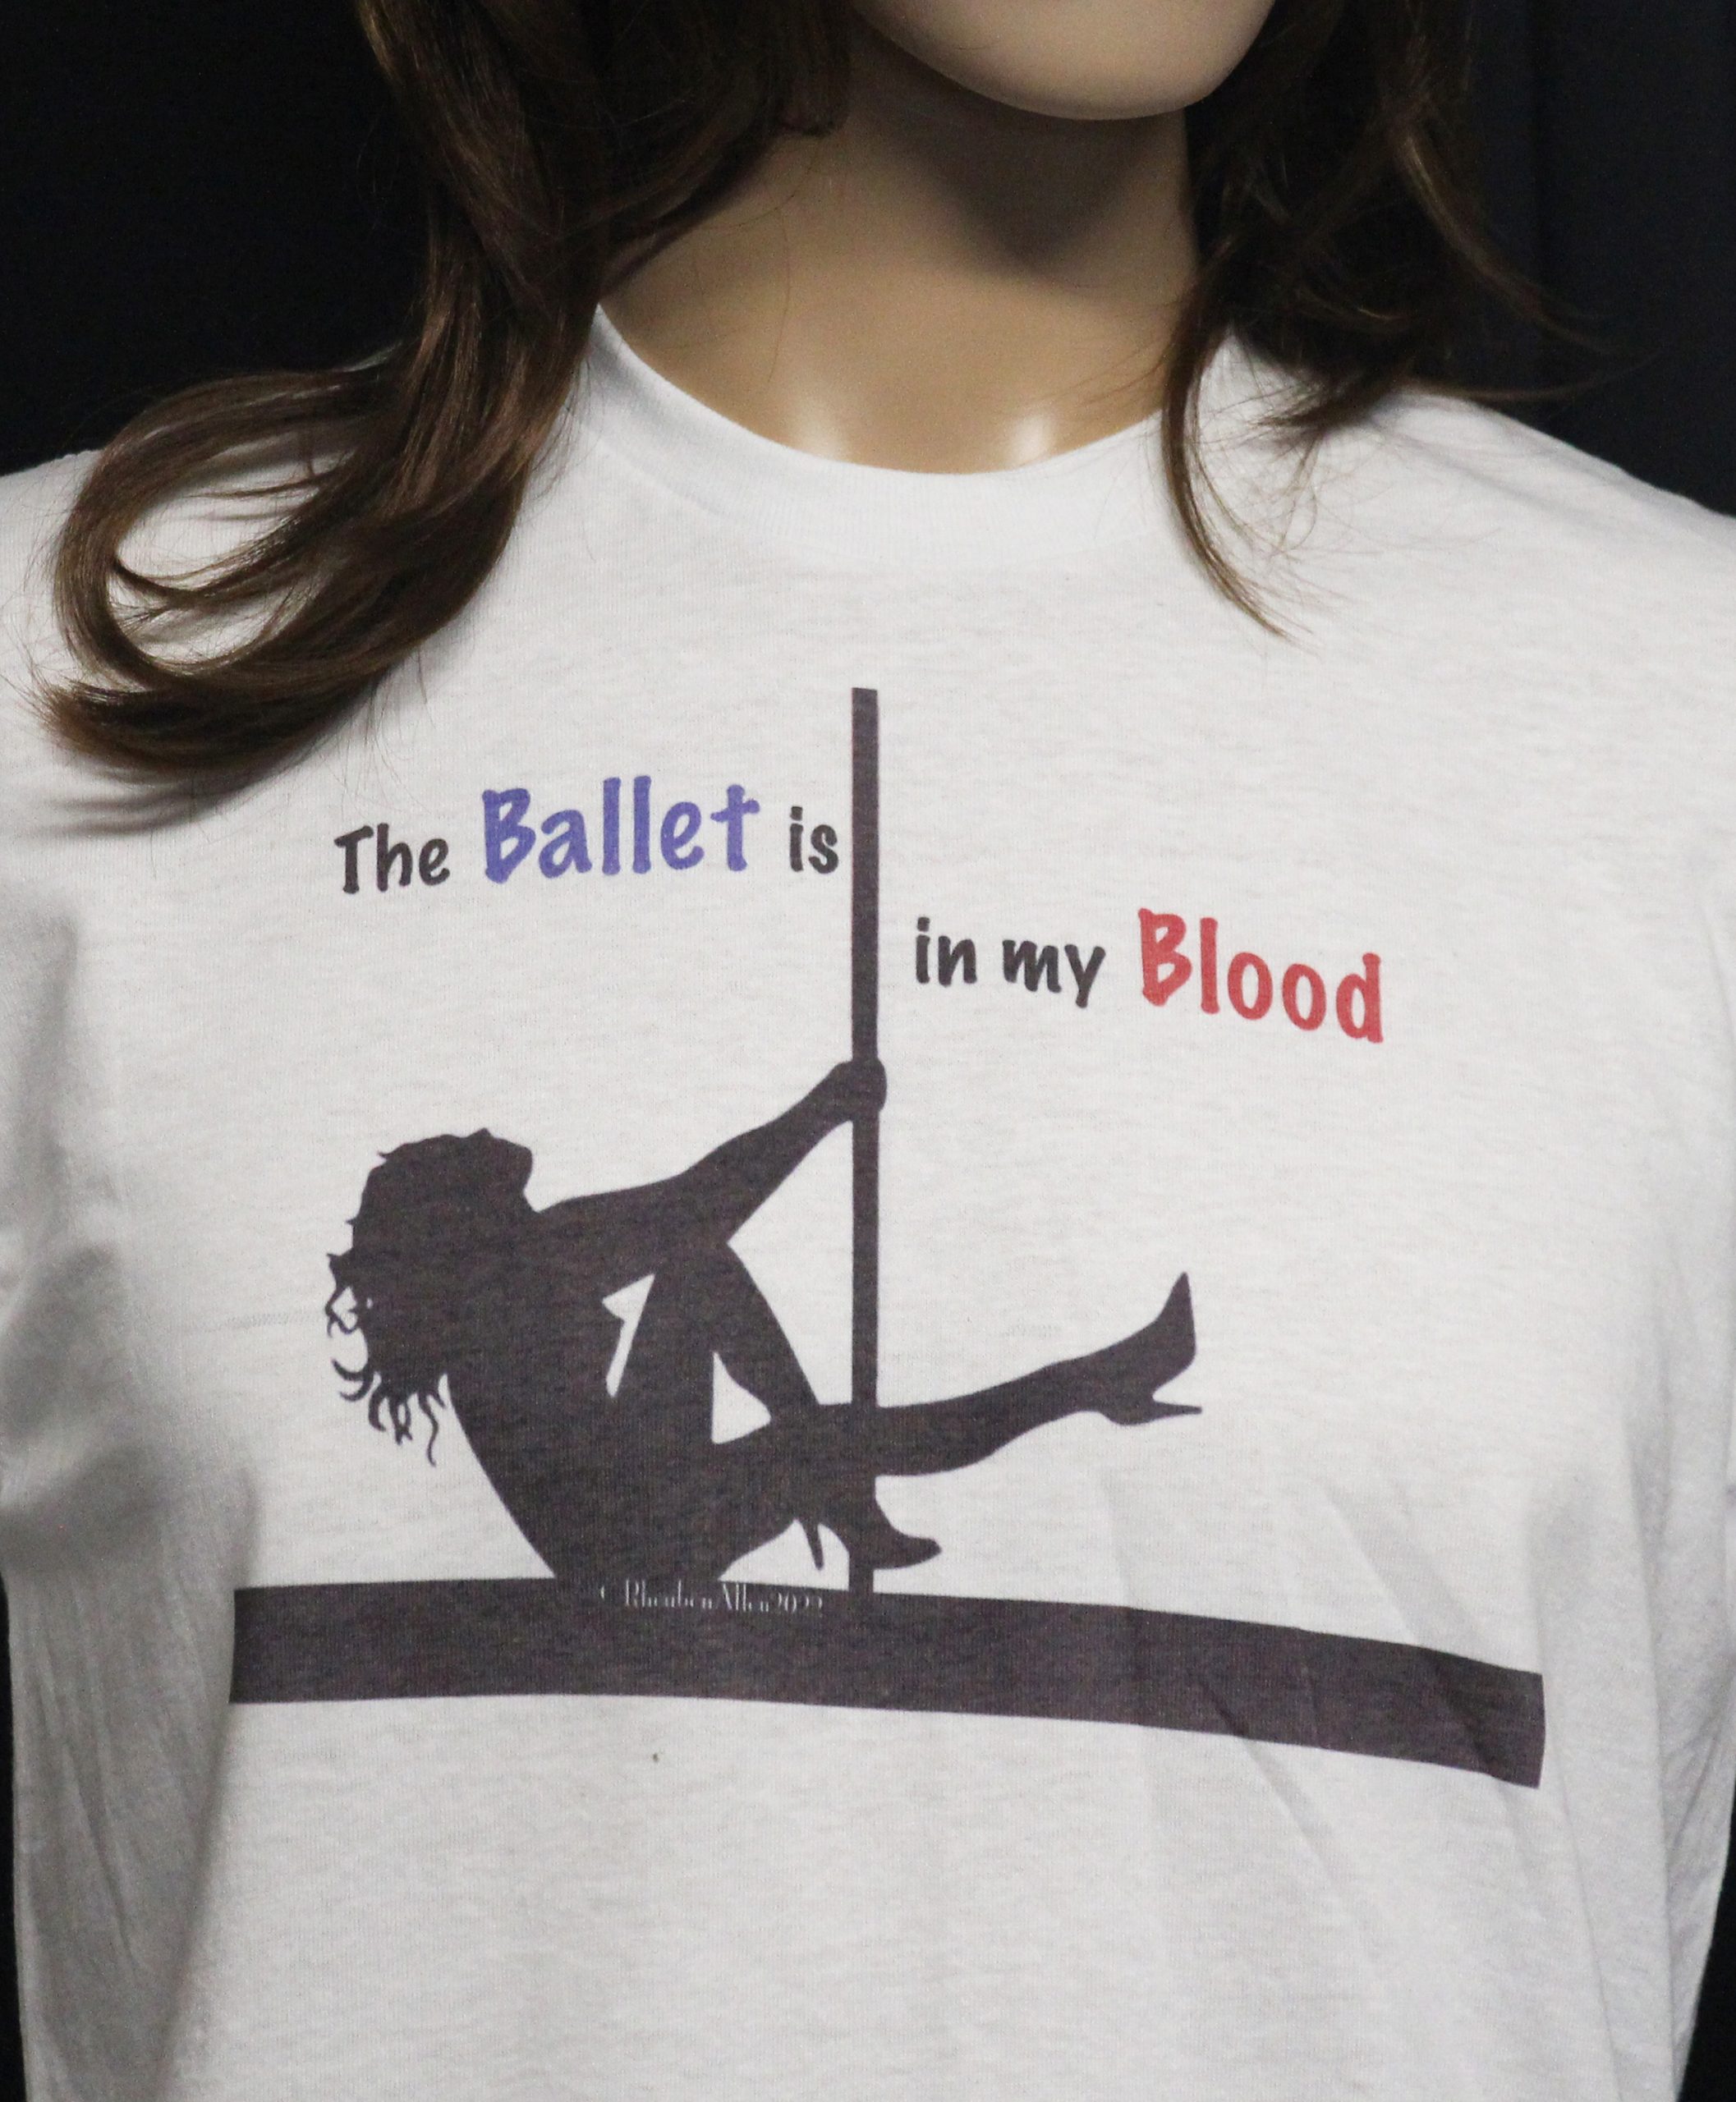 The Ballet is in my Blood